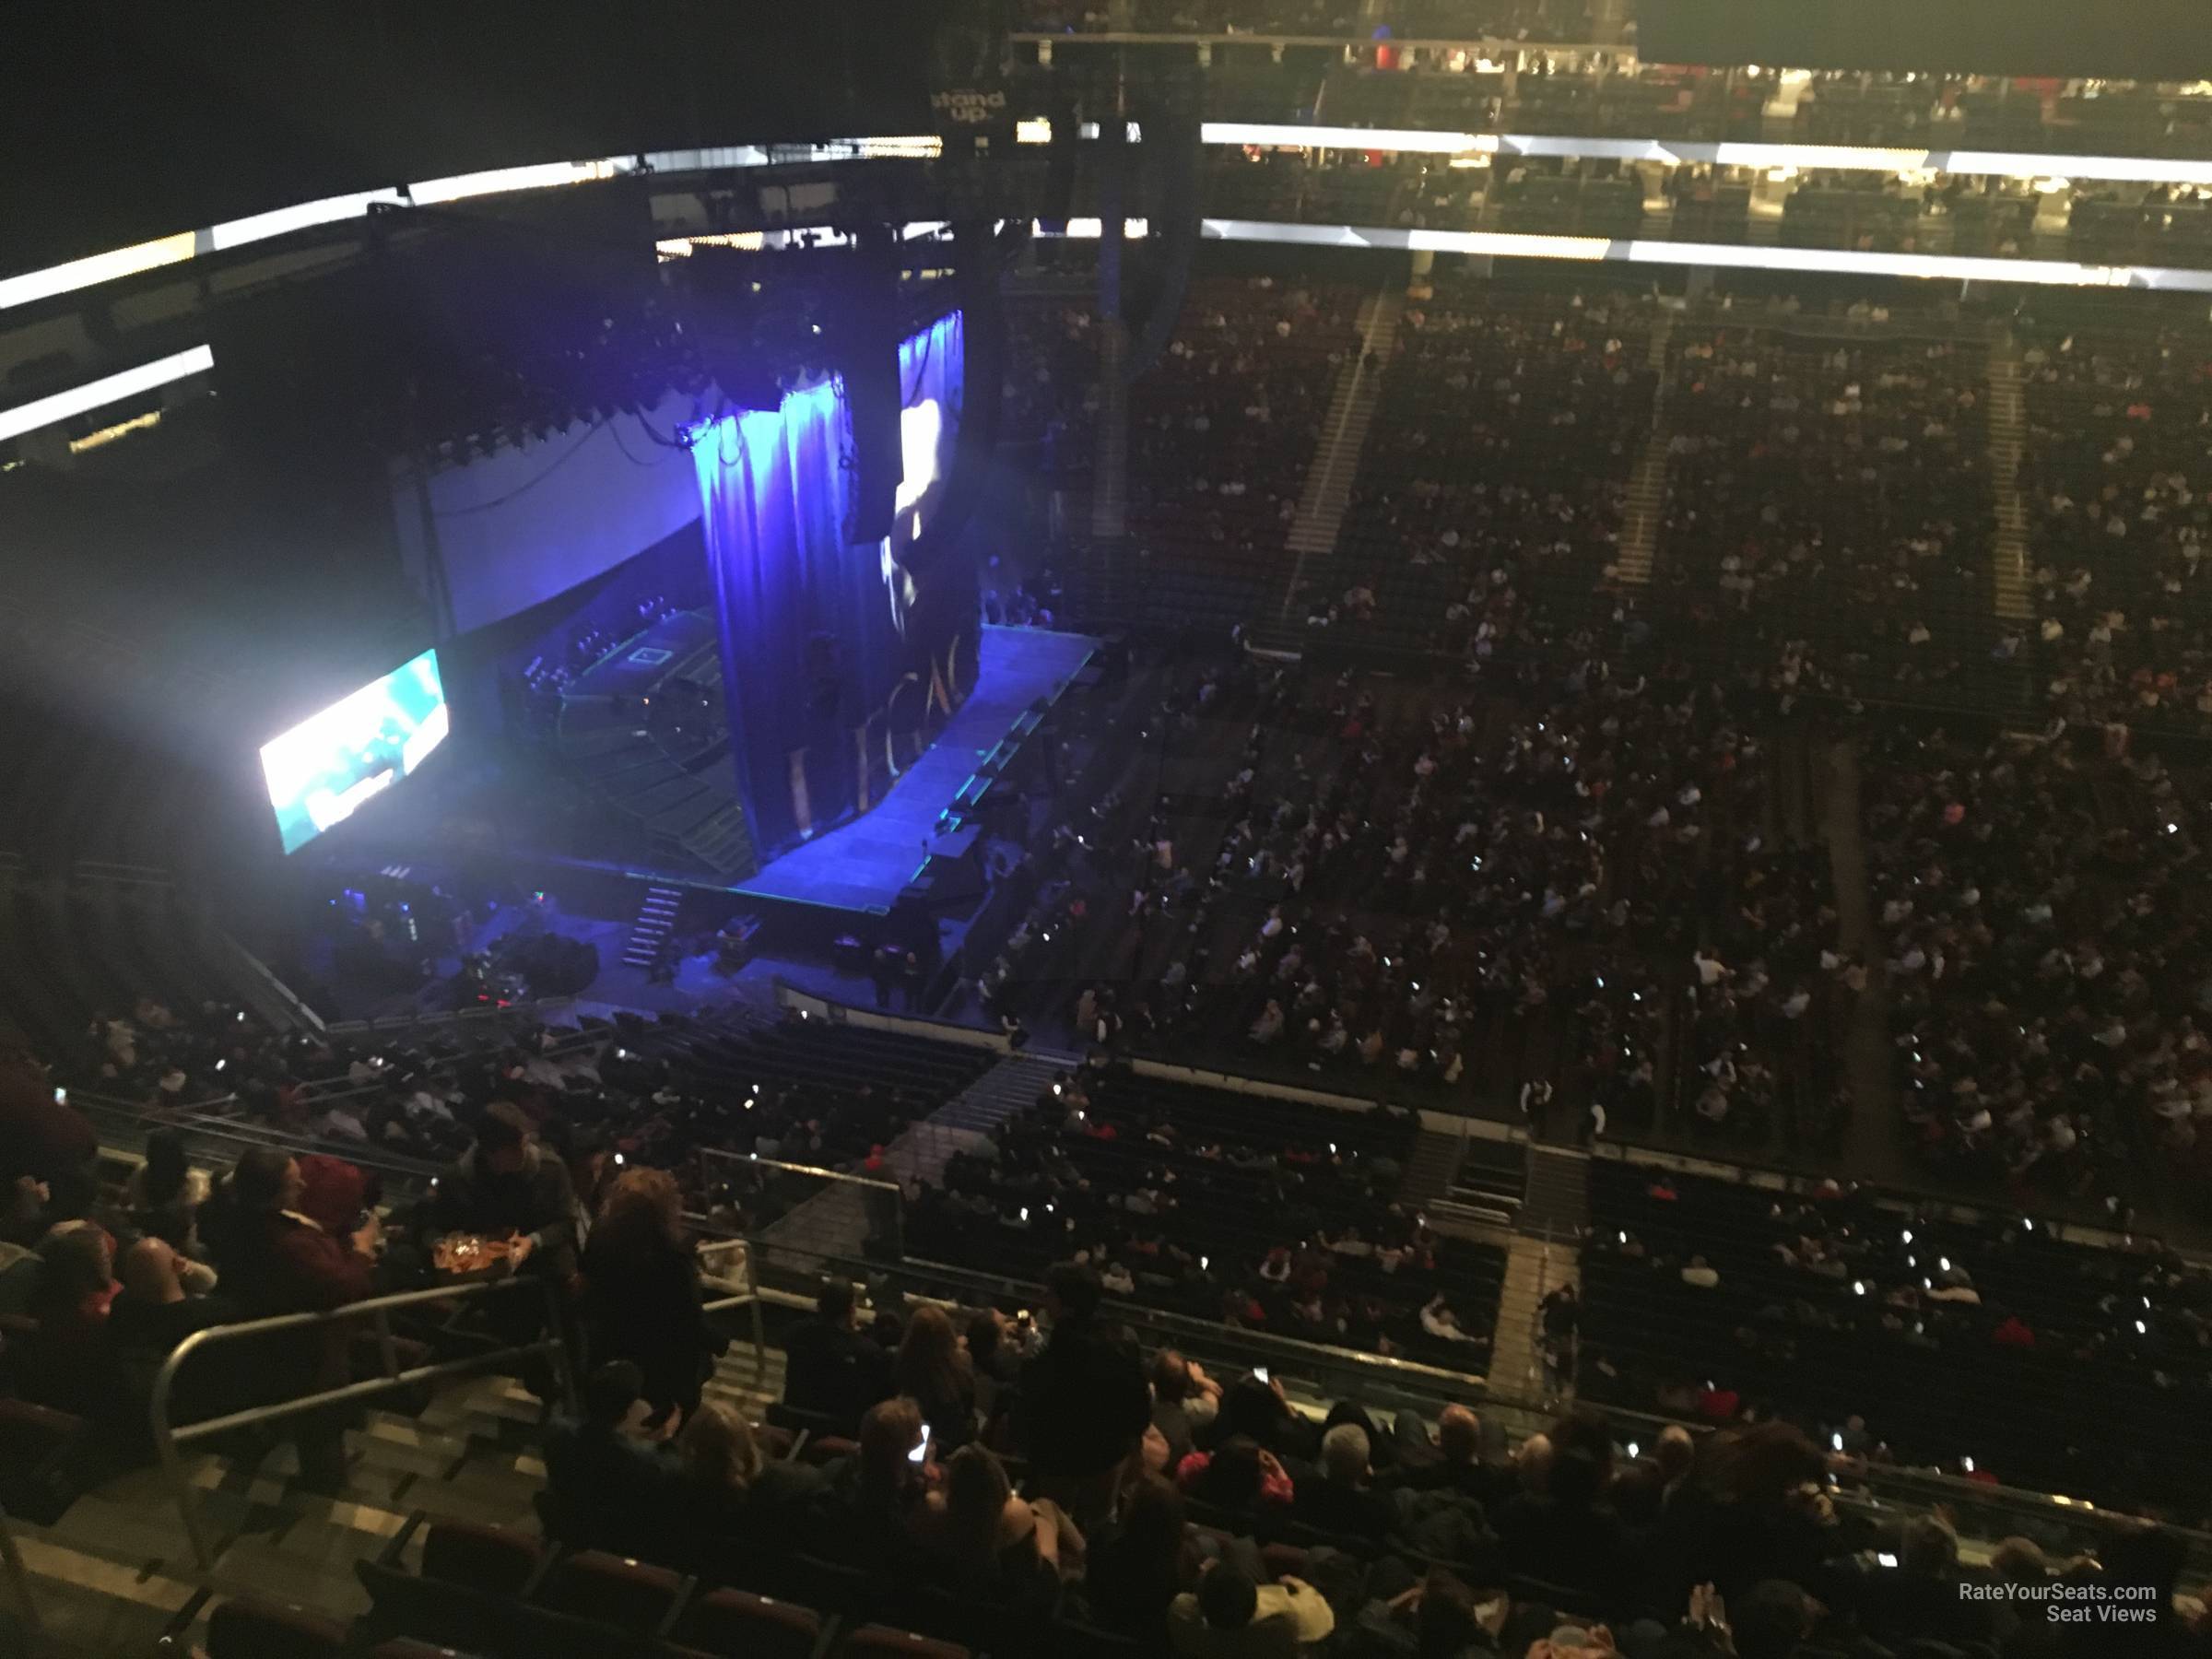 section 229, row 4 seat view  for concert - prudential center